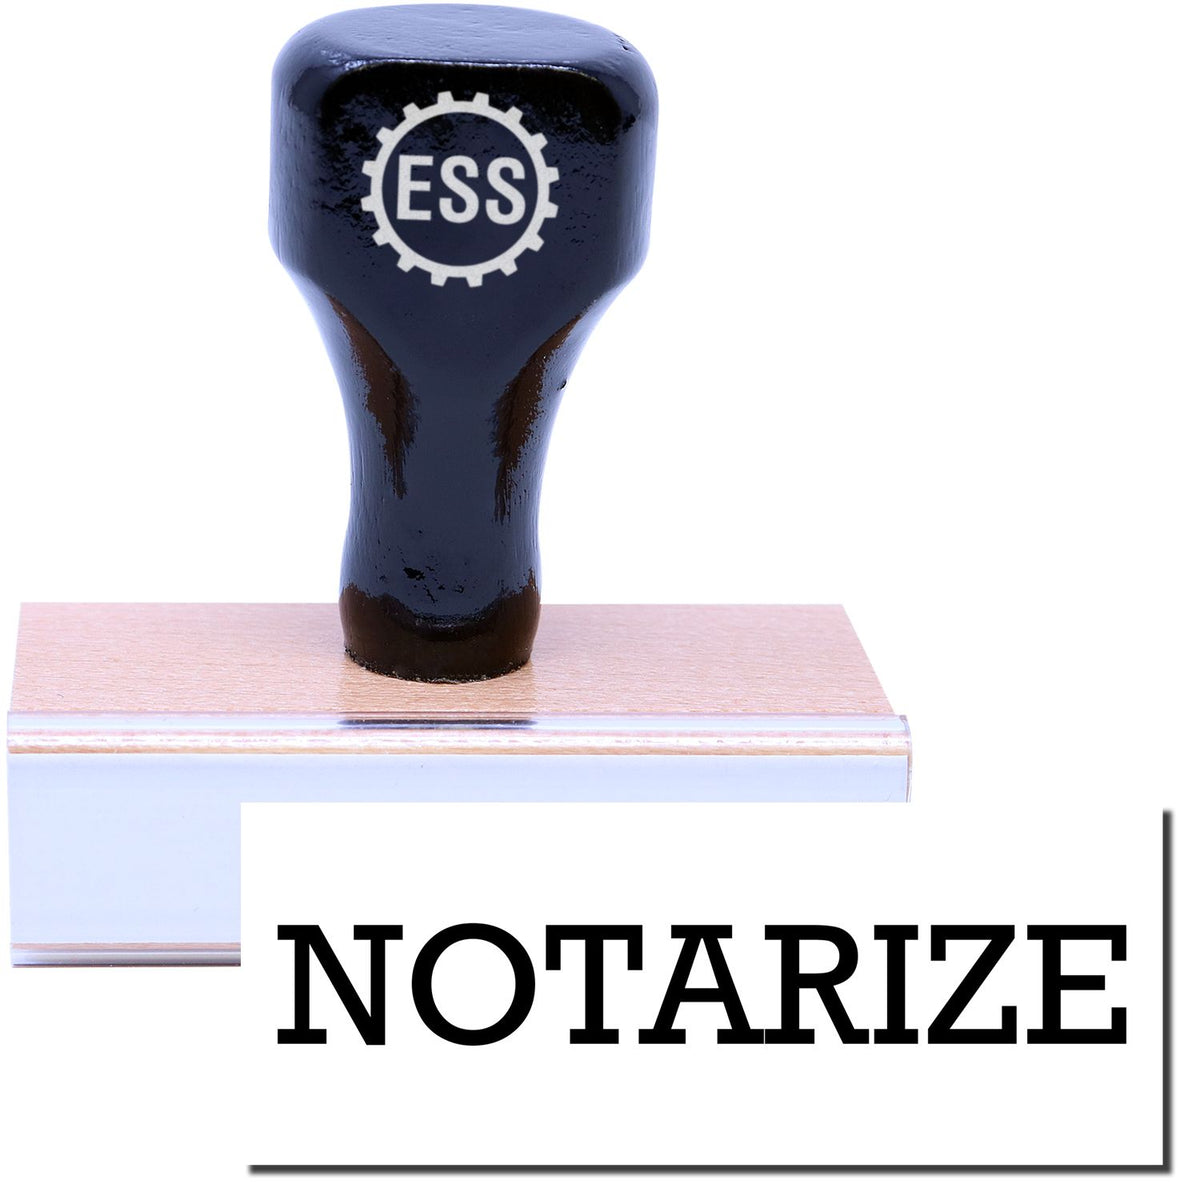 Notarize Rubber Stamp